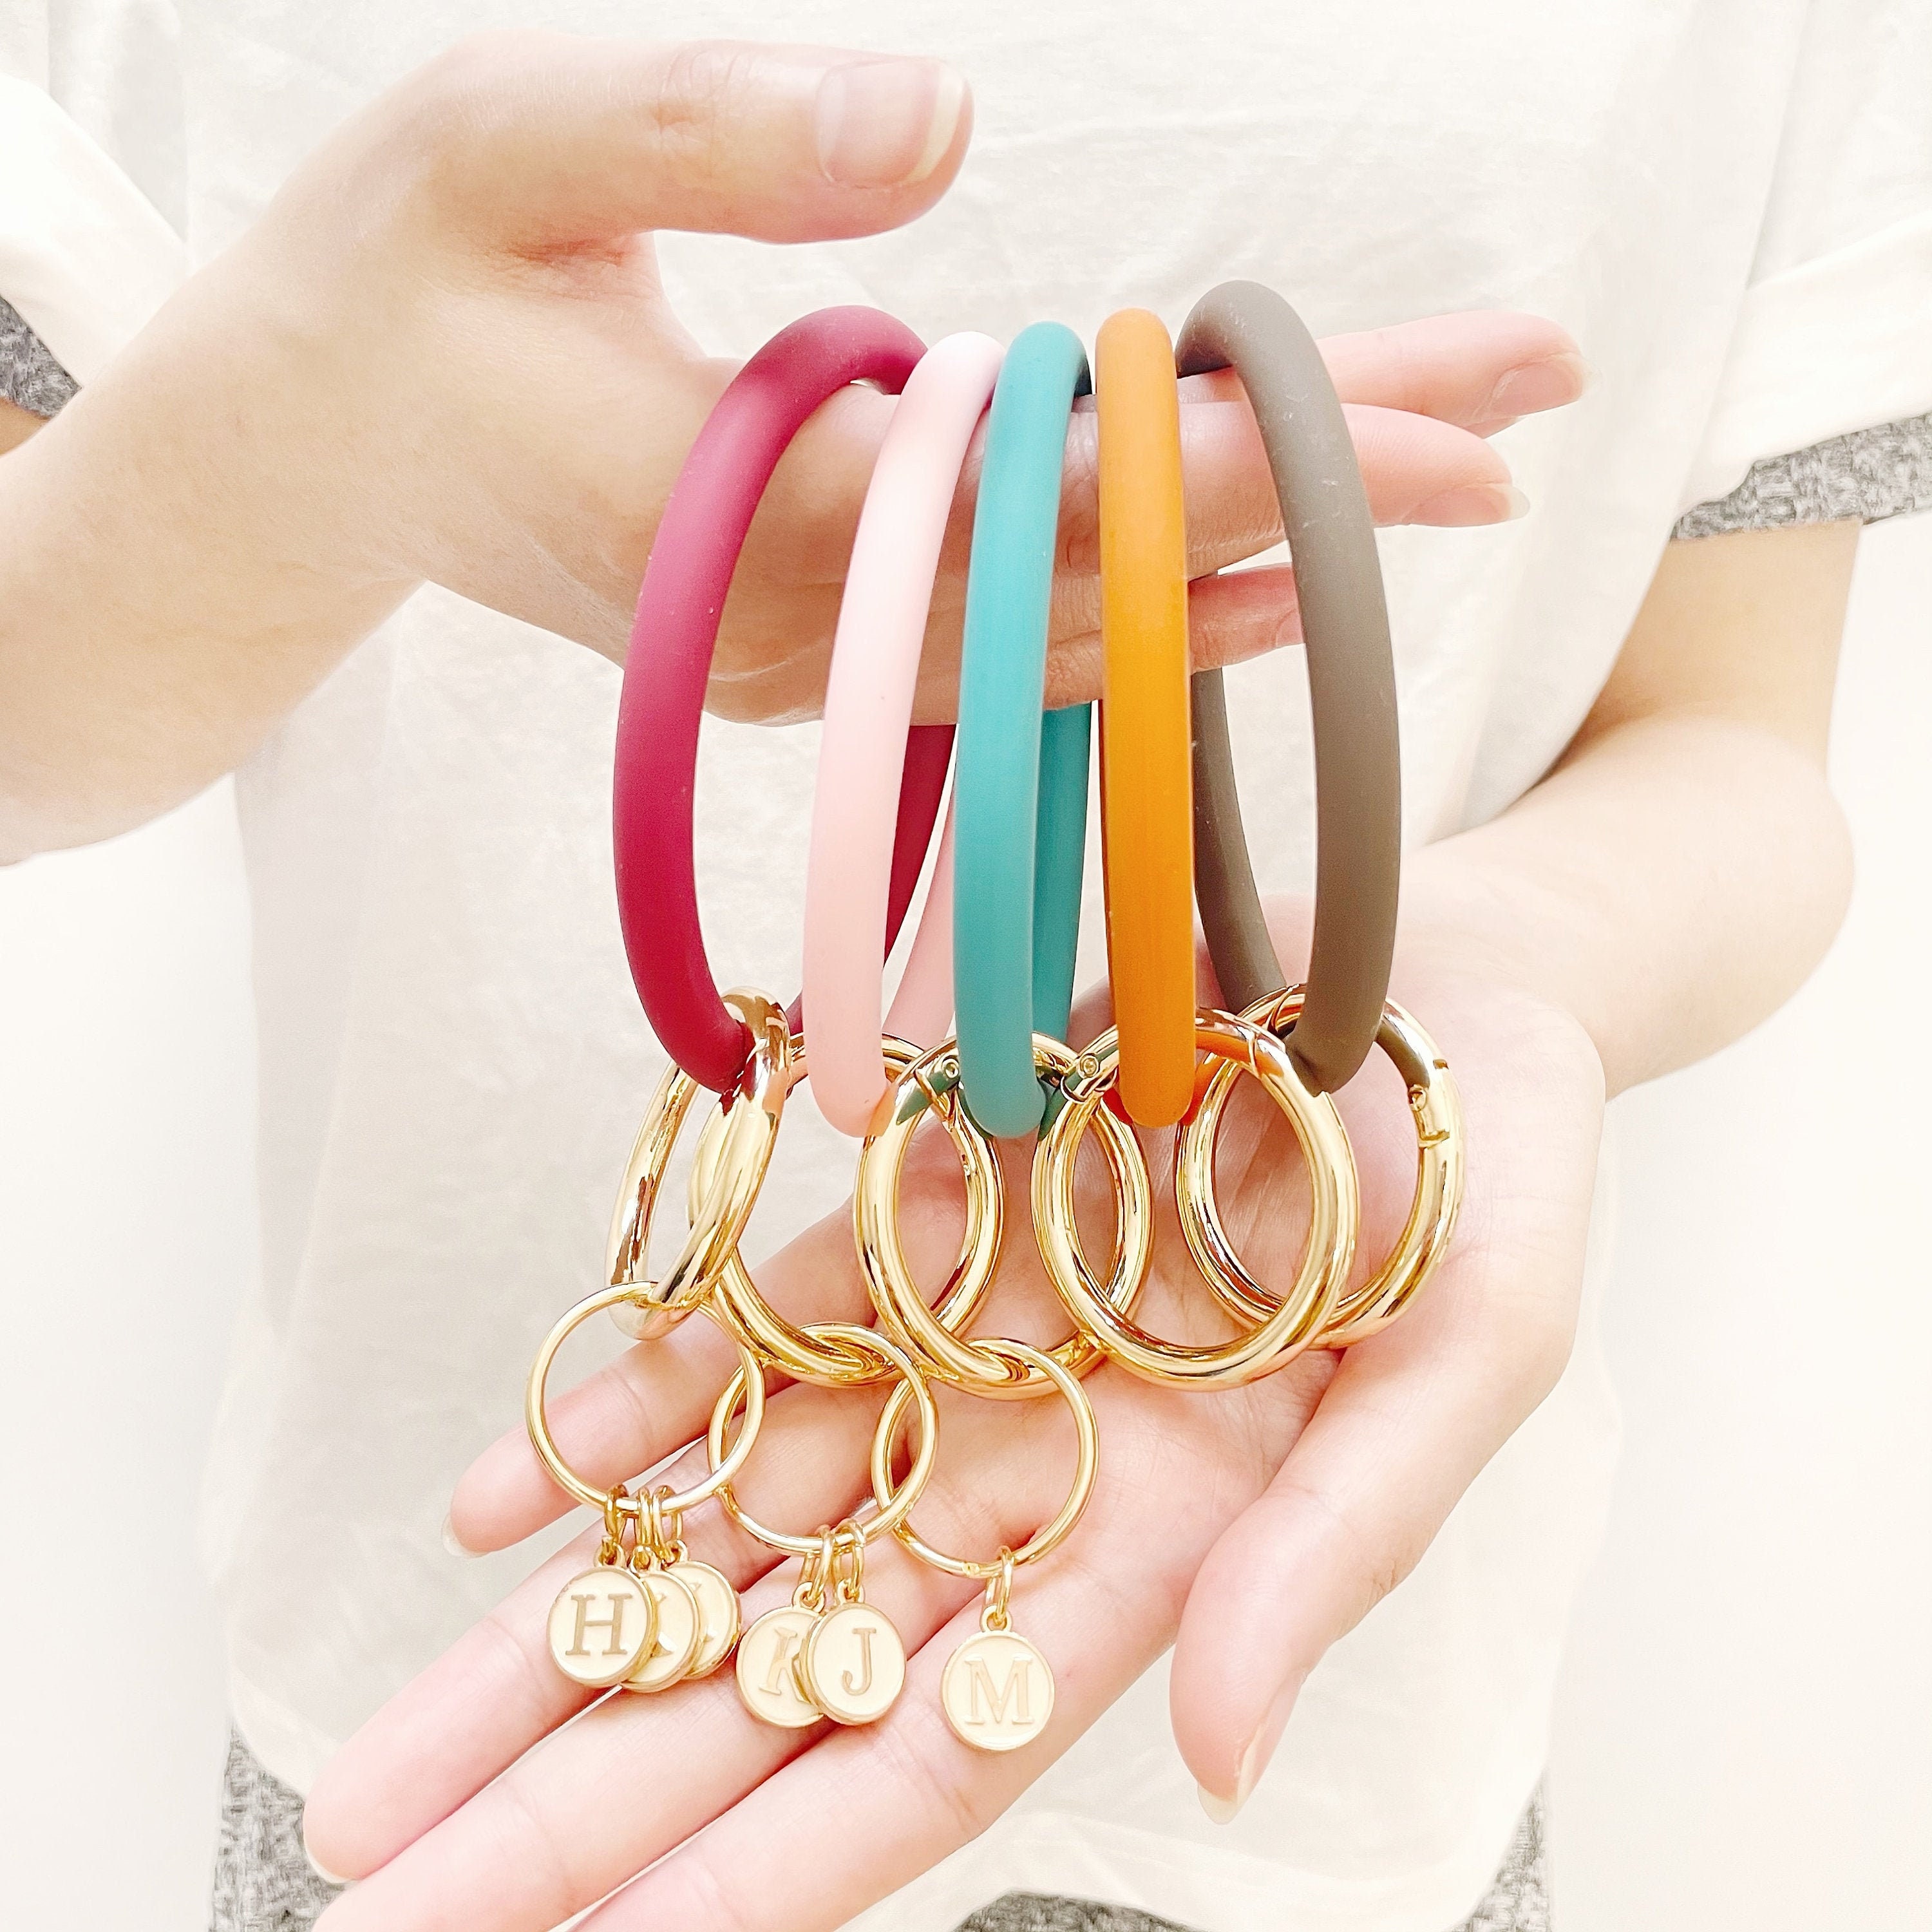 Custom Circle Silicone O Keychain For Women Wholesale Key Ring With Big  Wristlet The Strap From Wenjingcomeon, $0.64